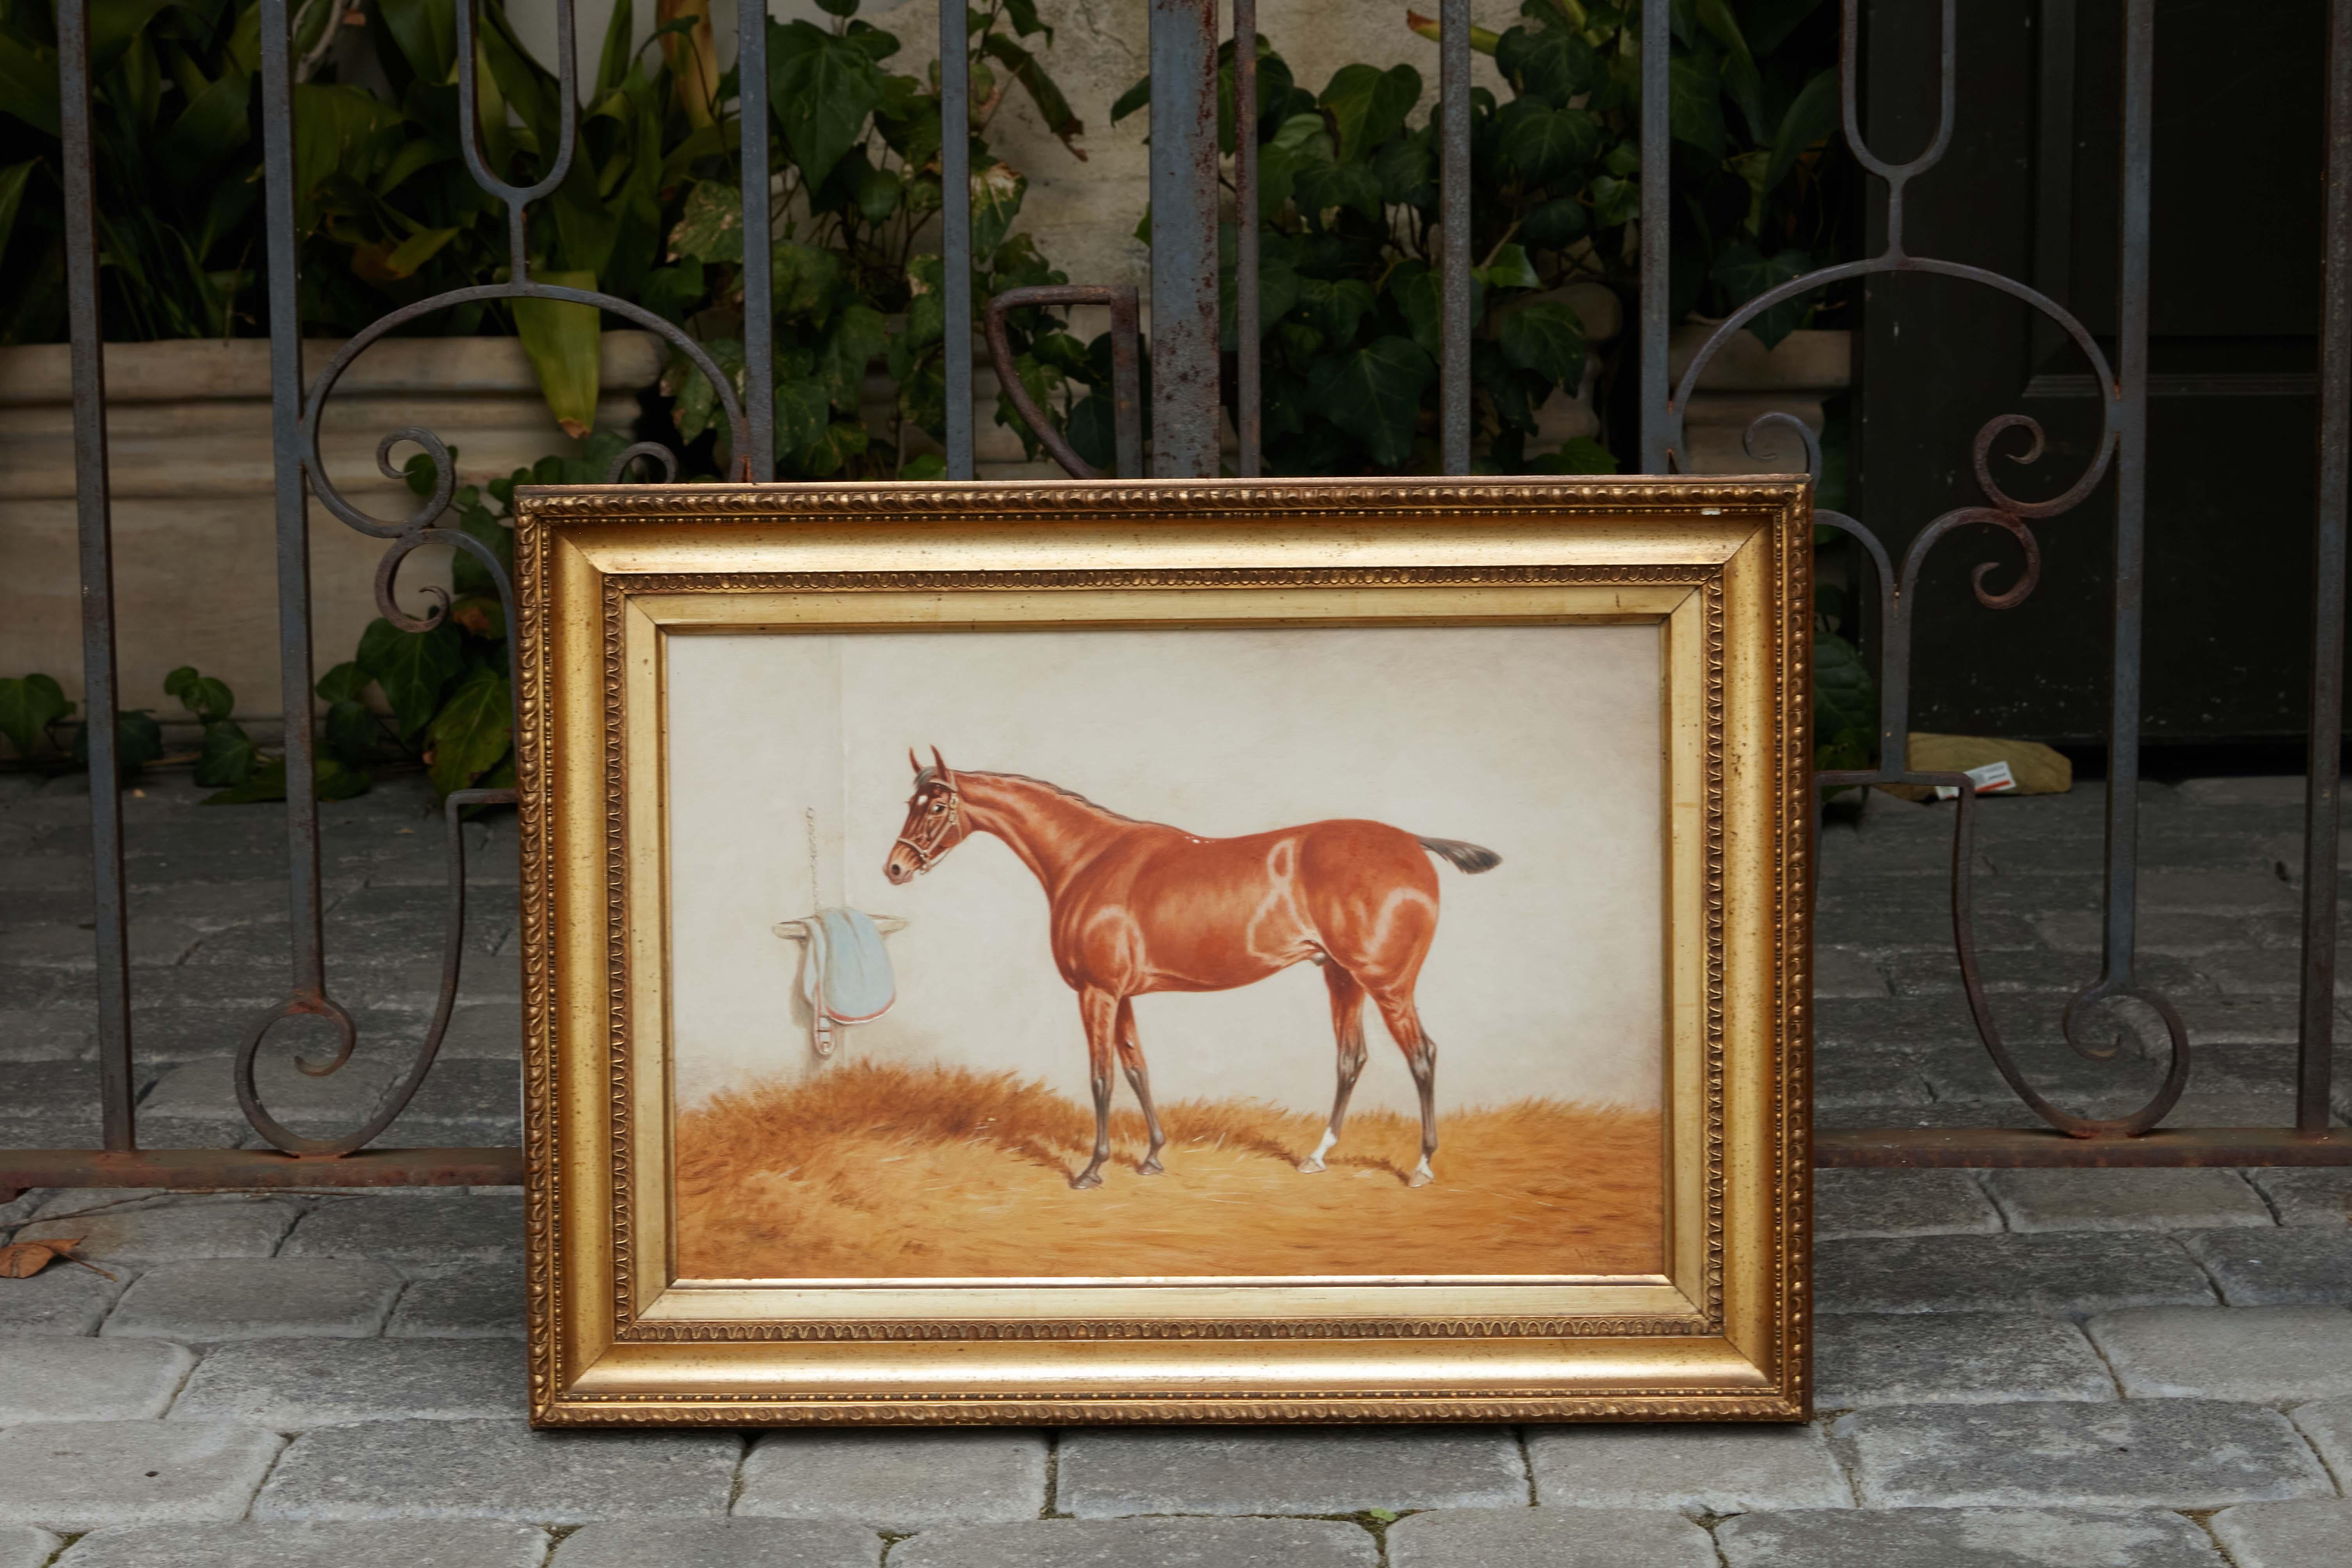 An English Turn of the Century oil on board horse painting from the early 20th century titled 